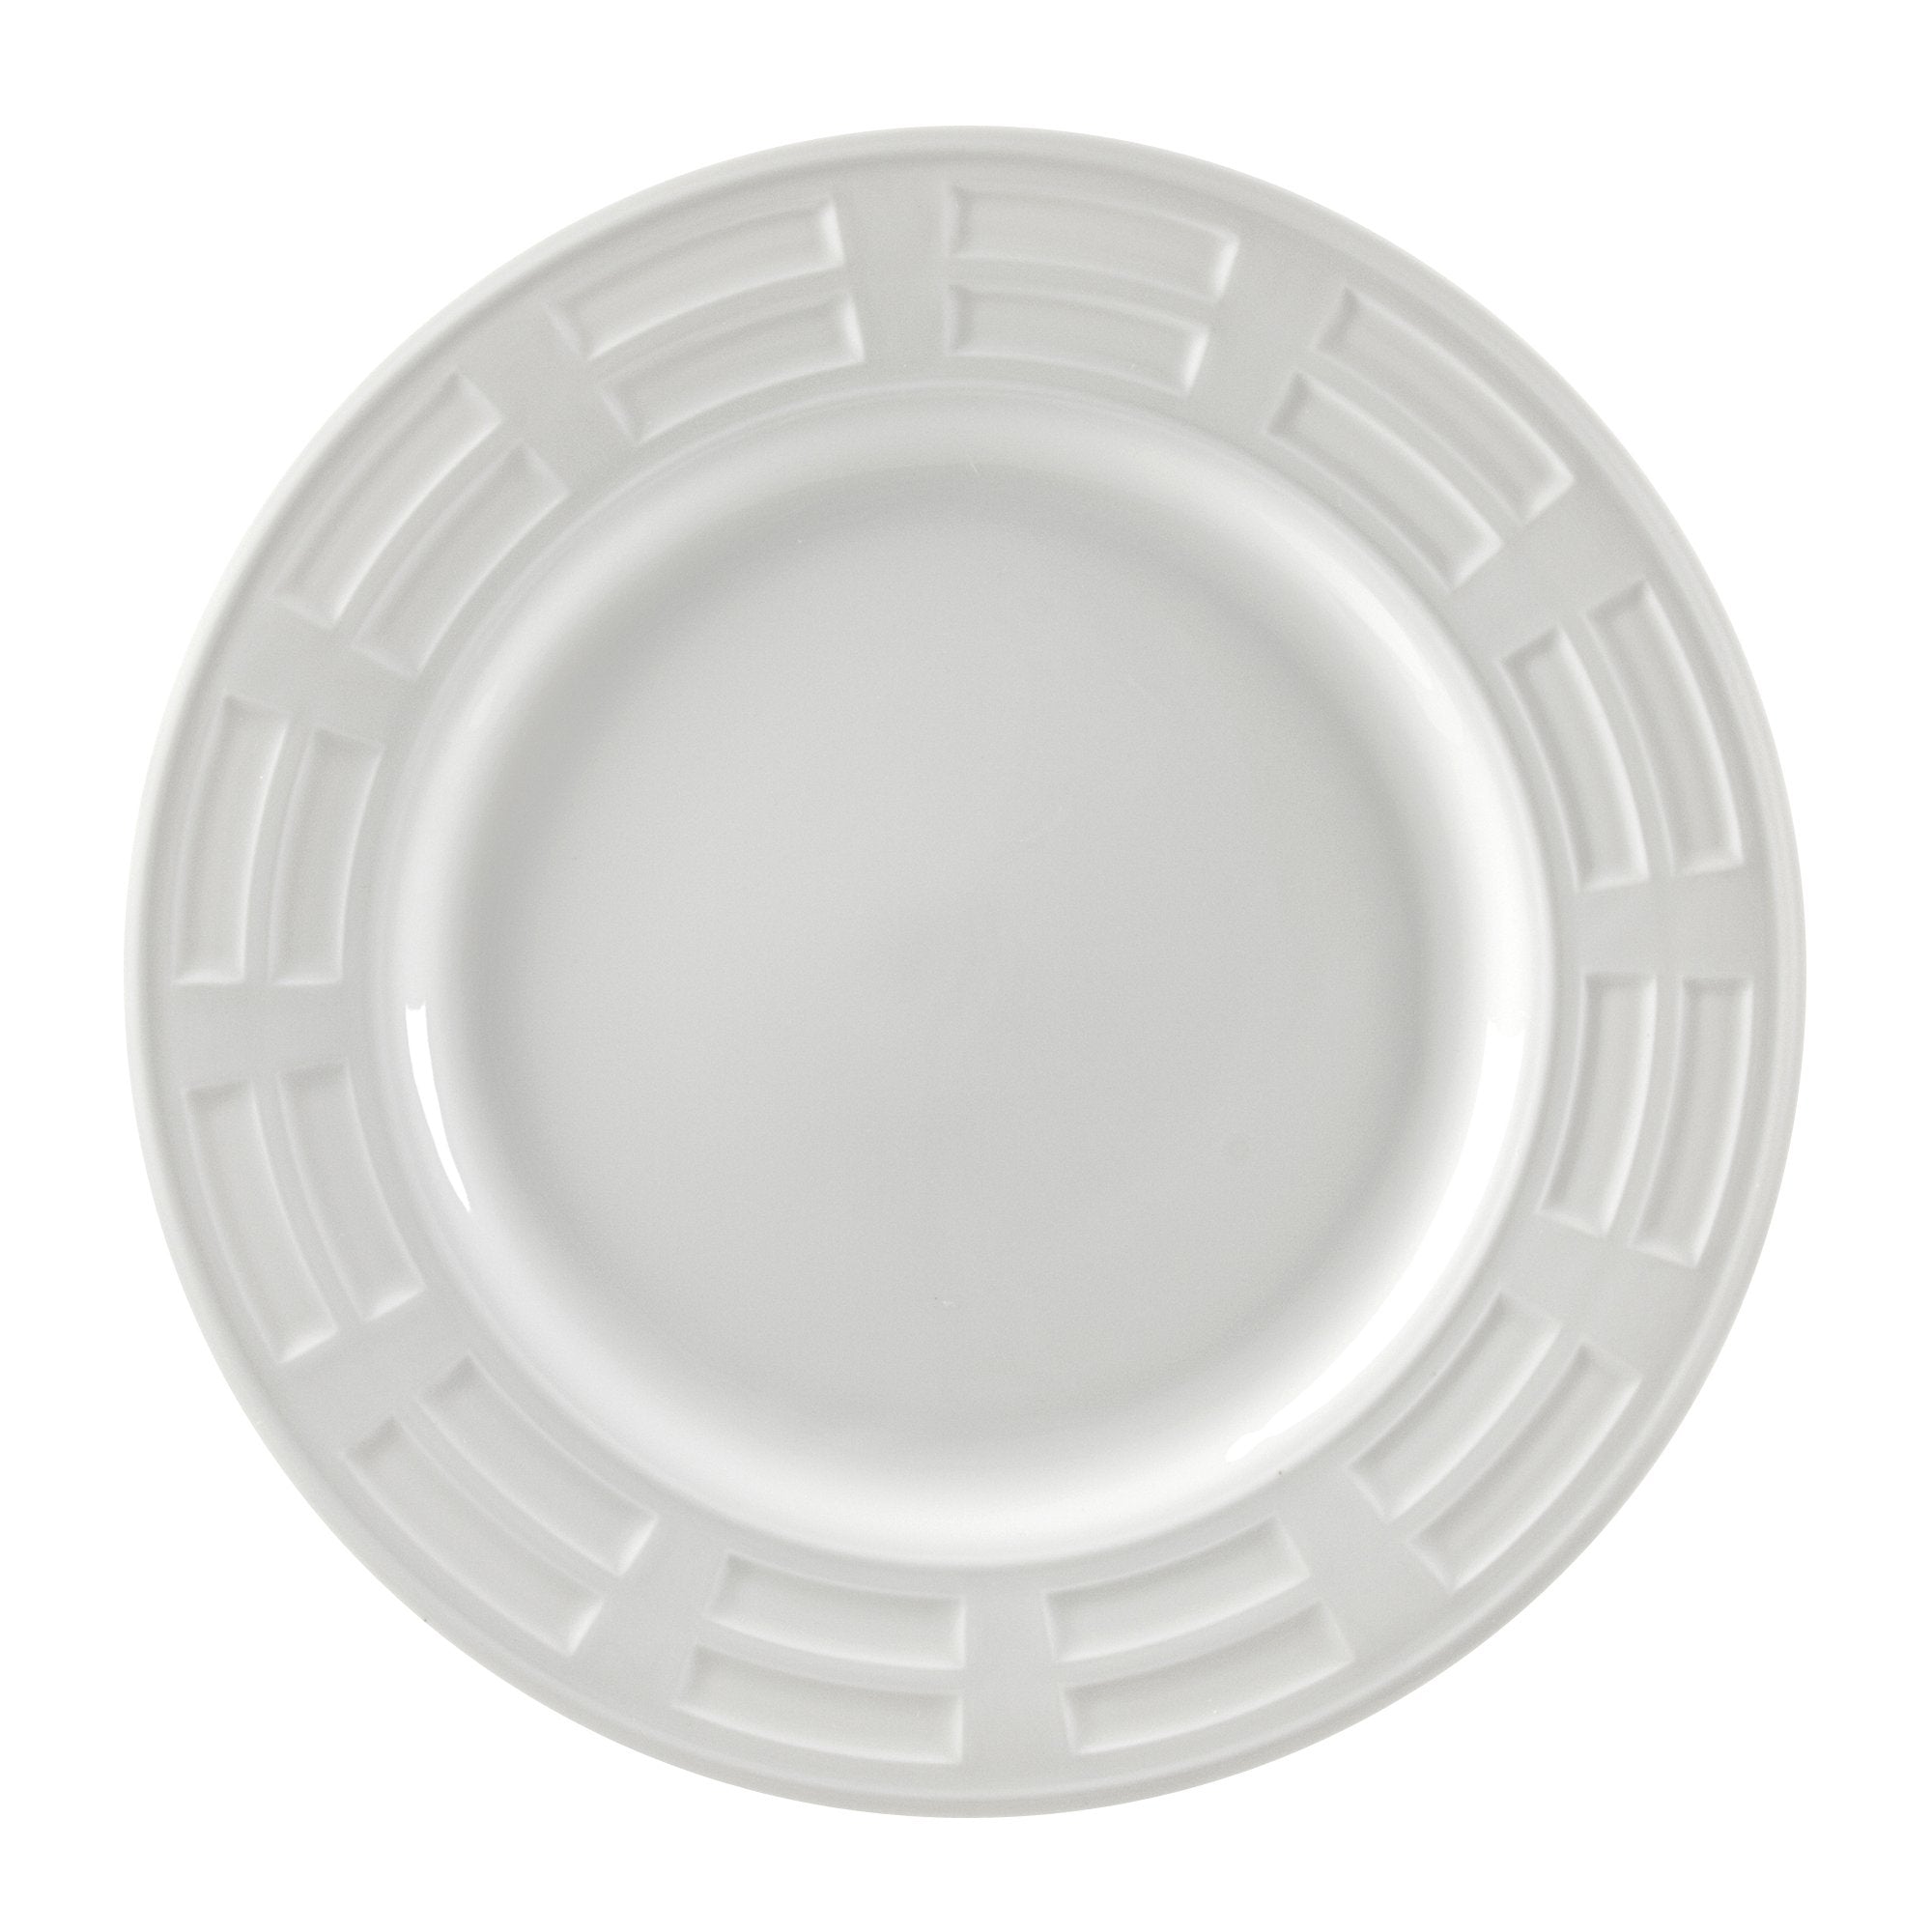 SORR0024, Dinnerware, Charger Plate  (12/Case) - iFoodservice Online